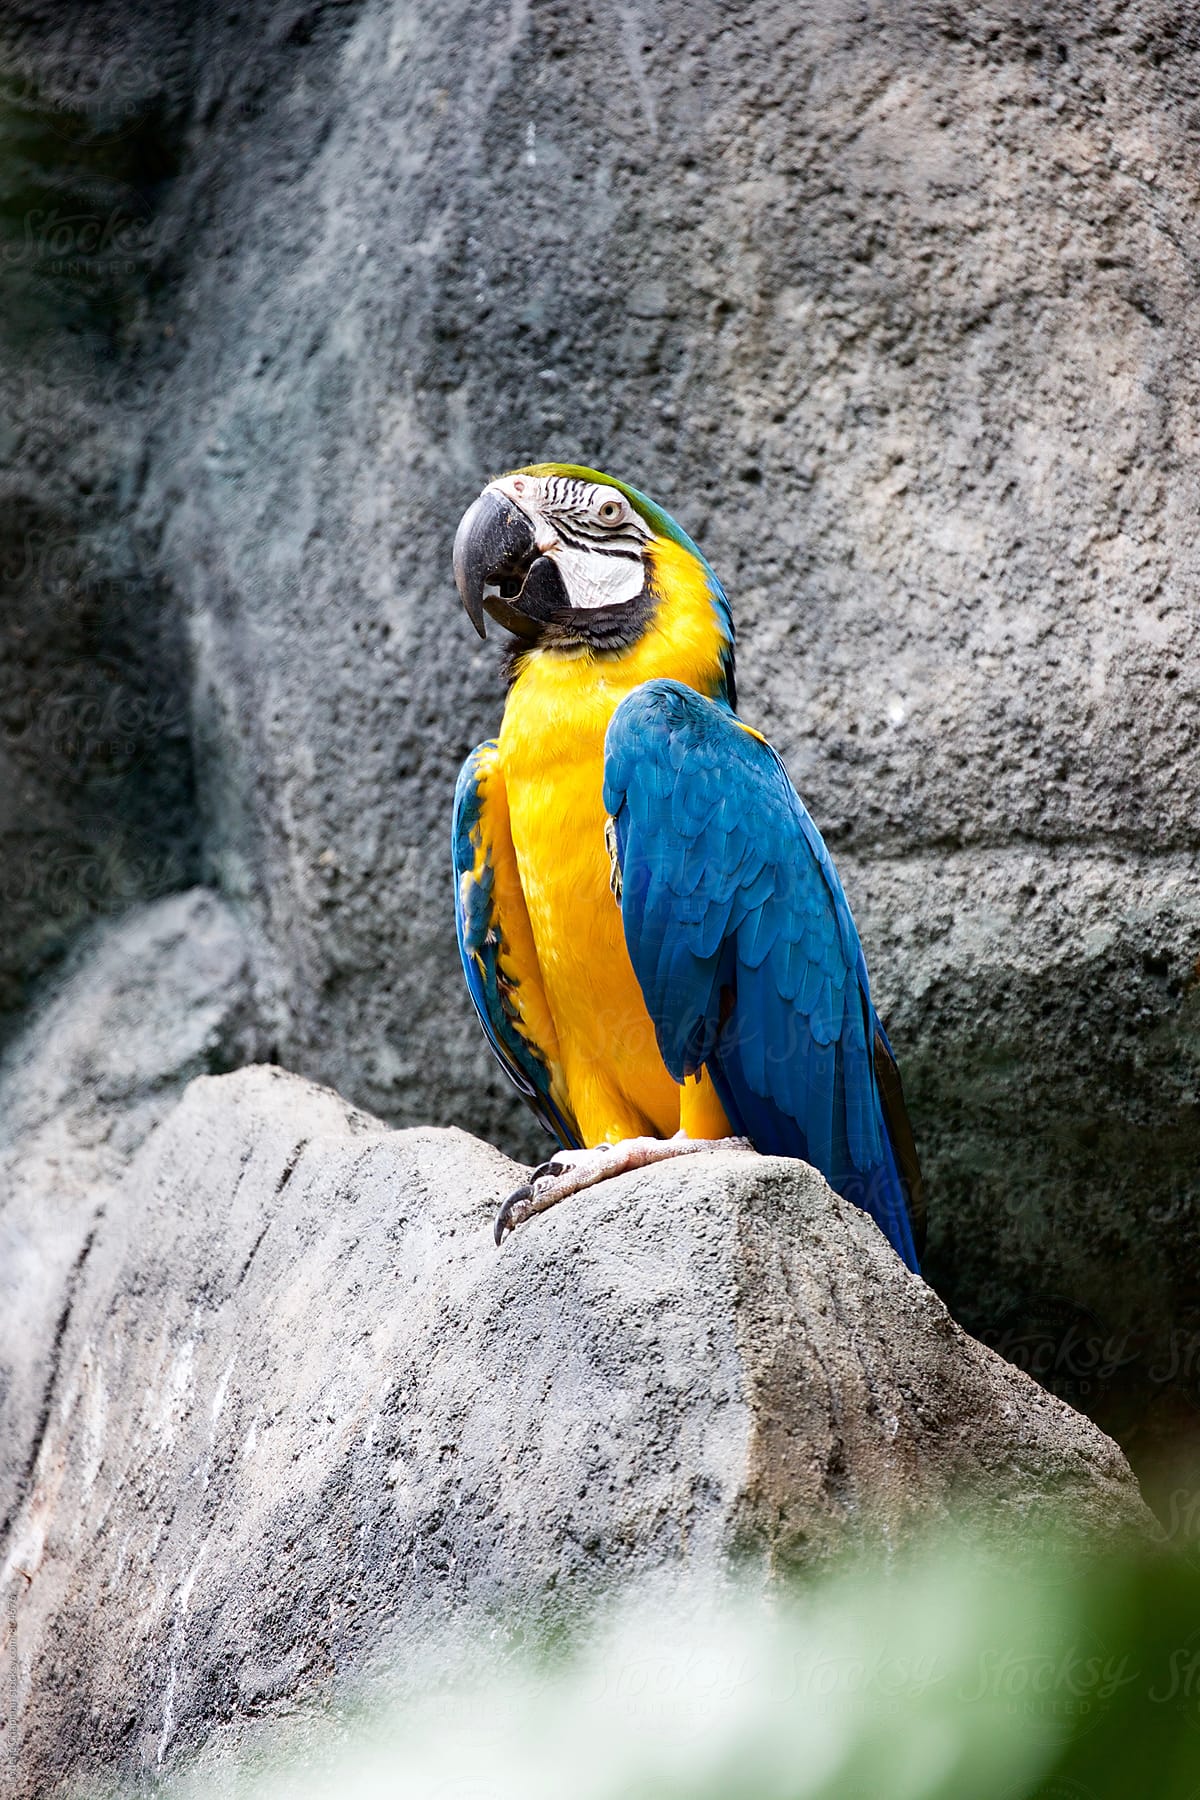 The magnificent colours of the tropical Macaw bird